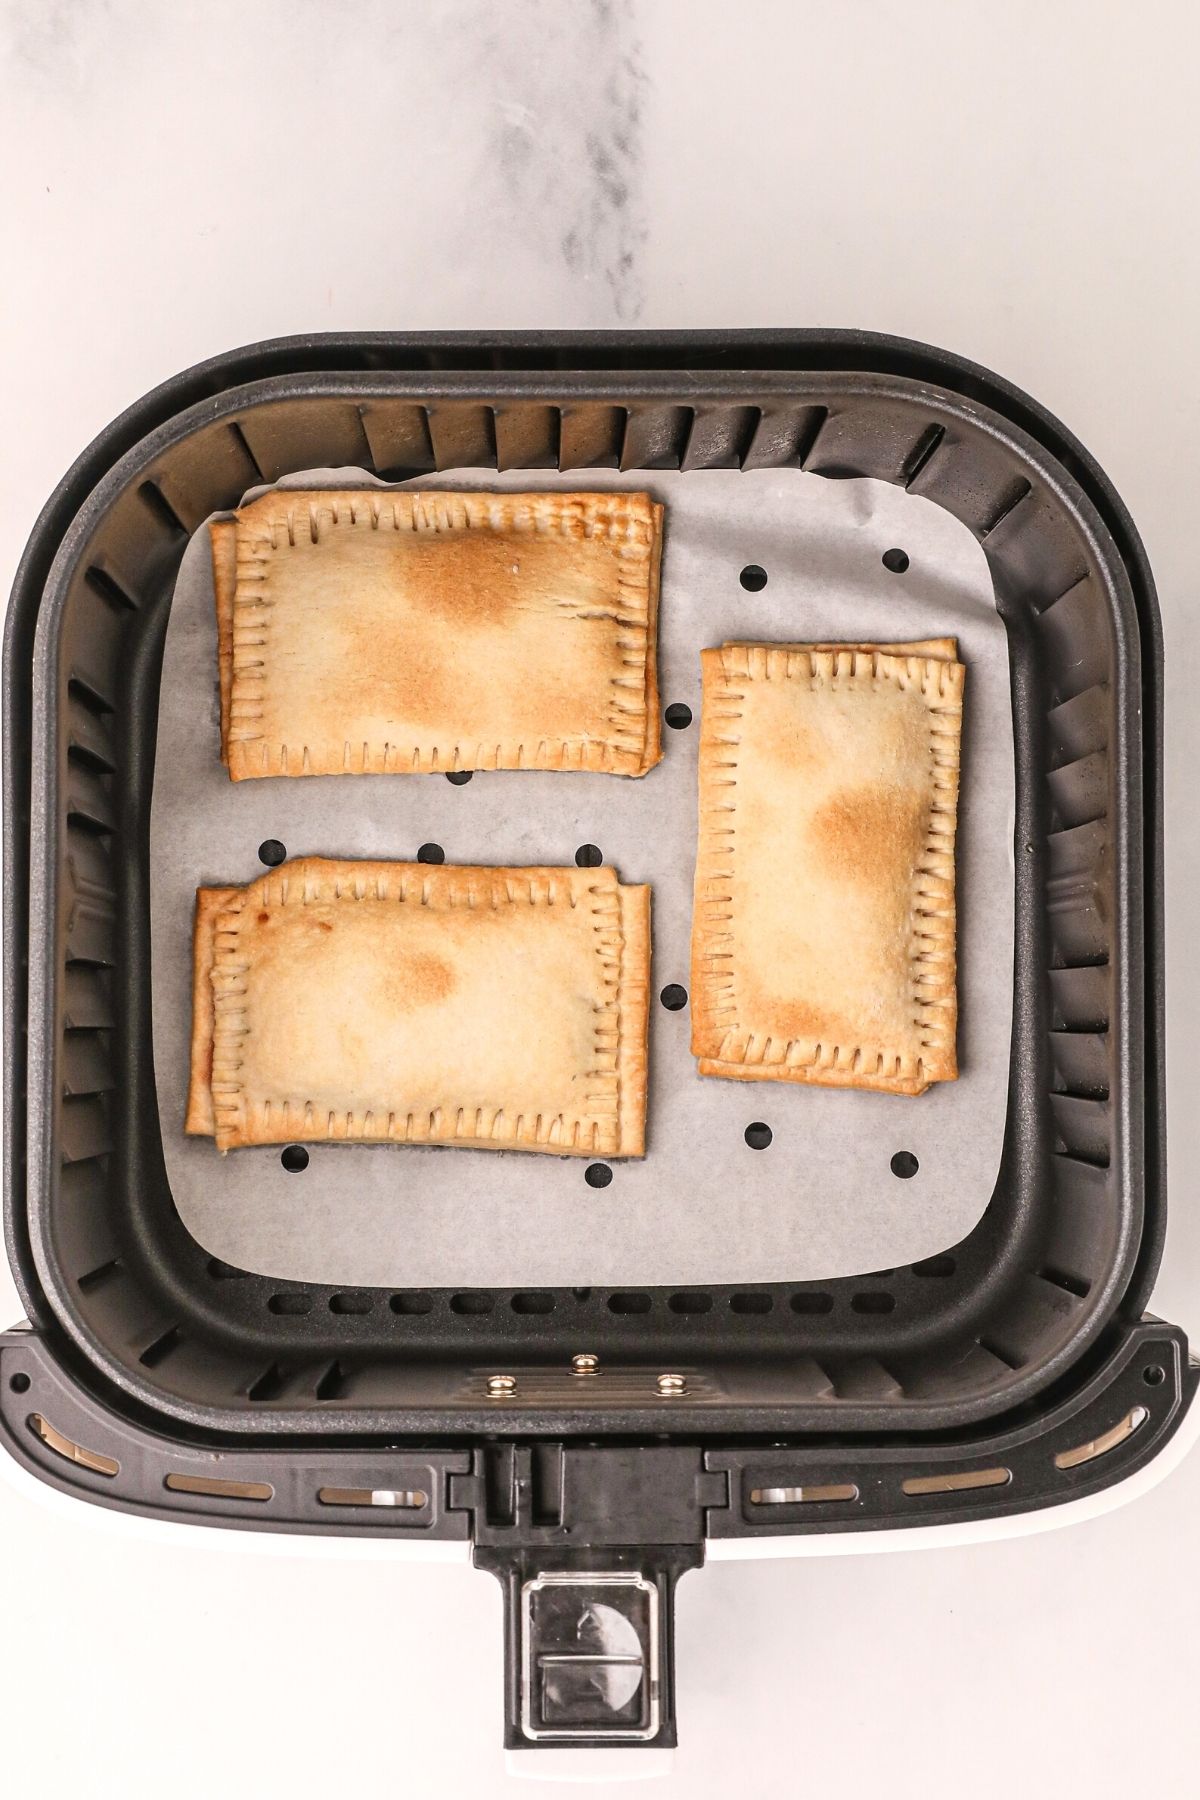 Golden pastries cooked in the air fryer basket